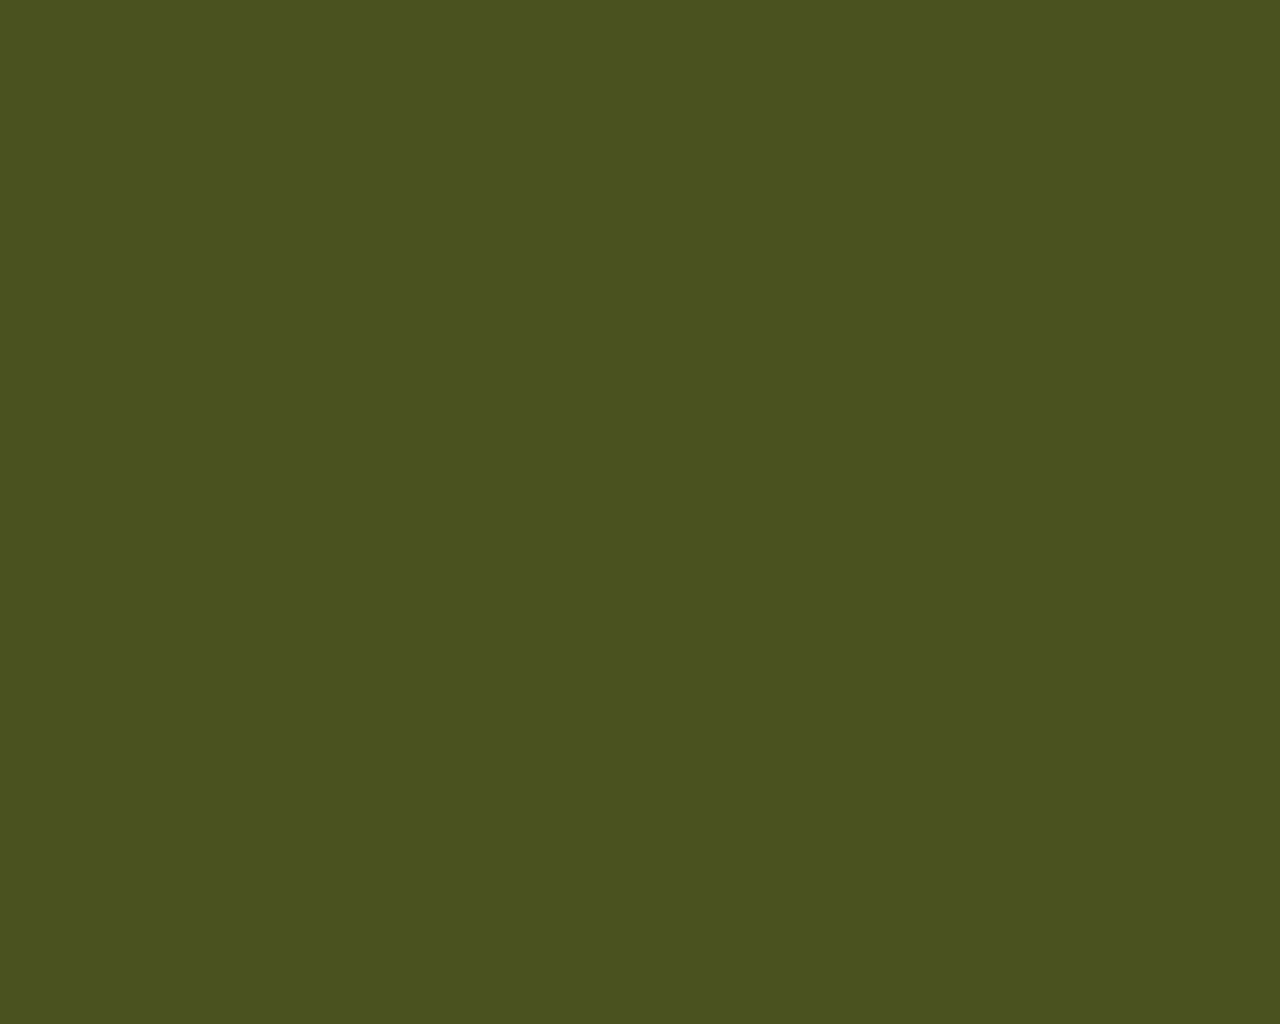 Abstract Olive Green Background Wallpaper